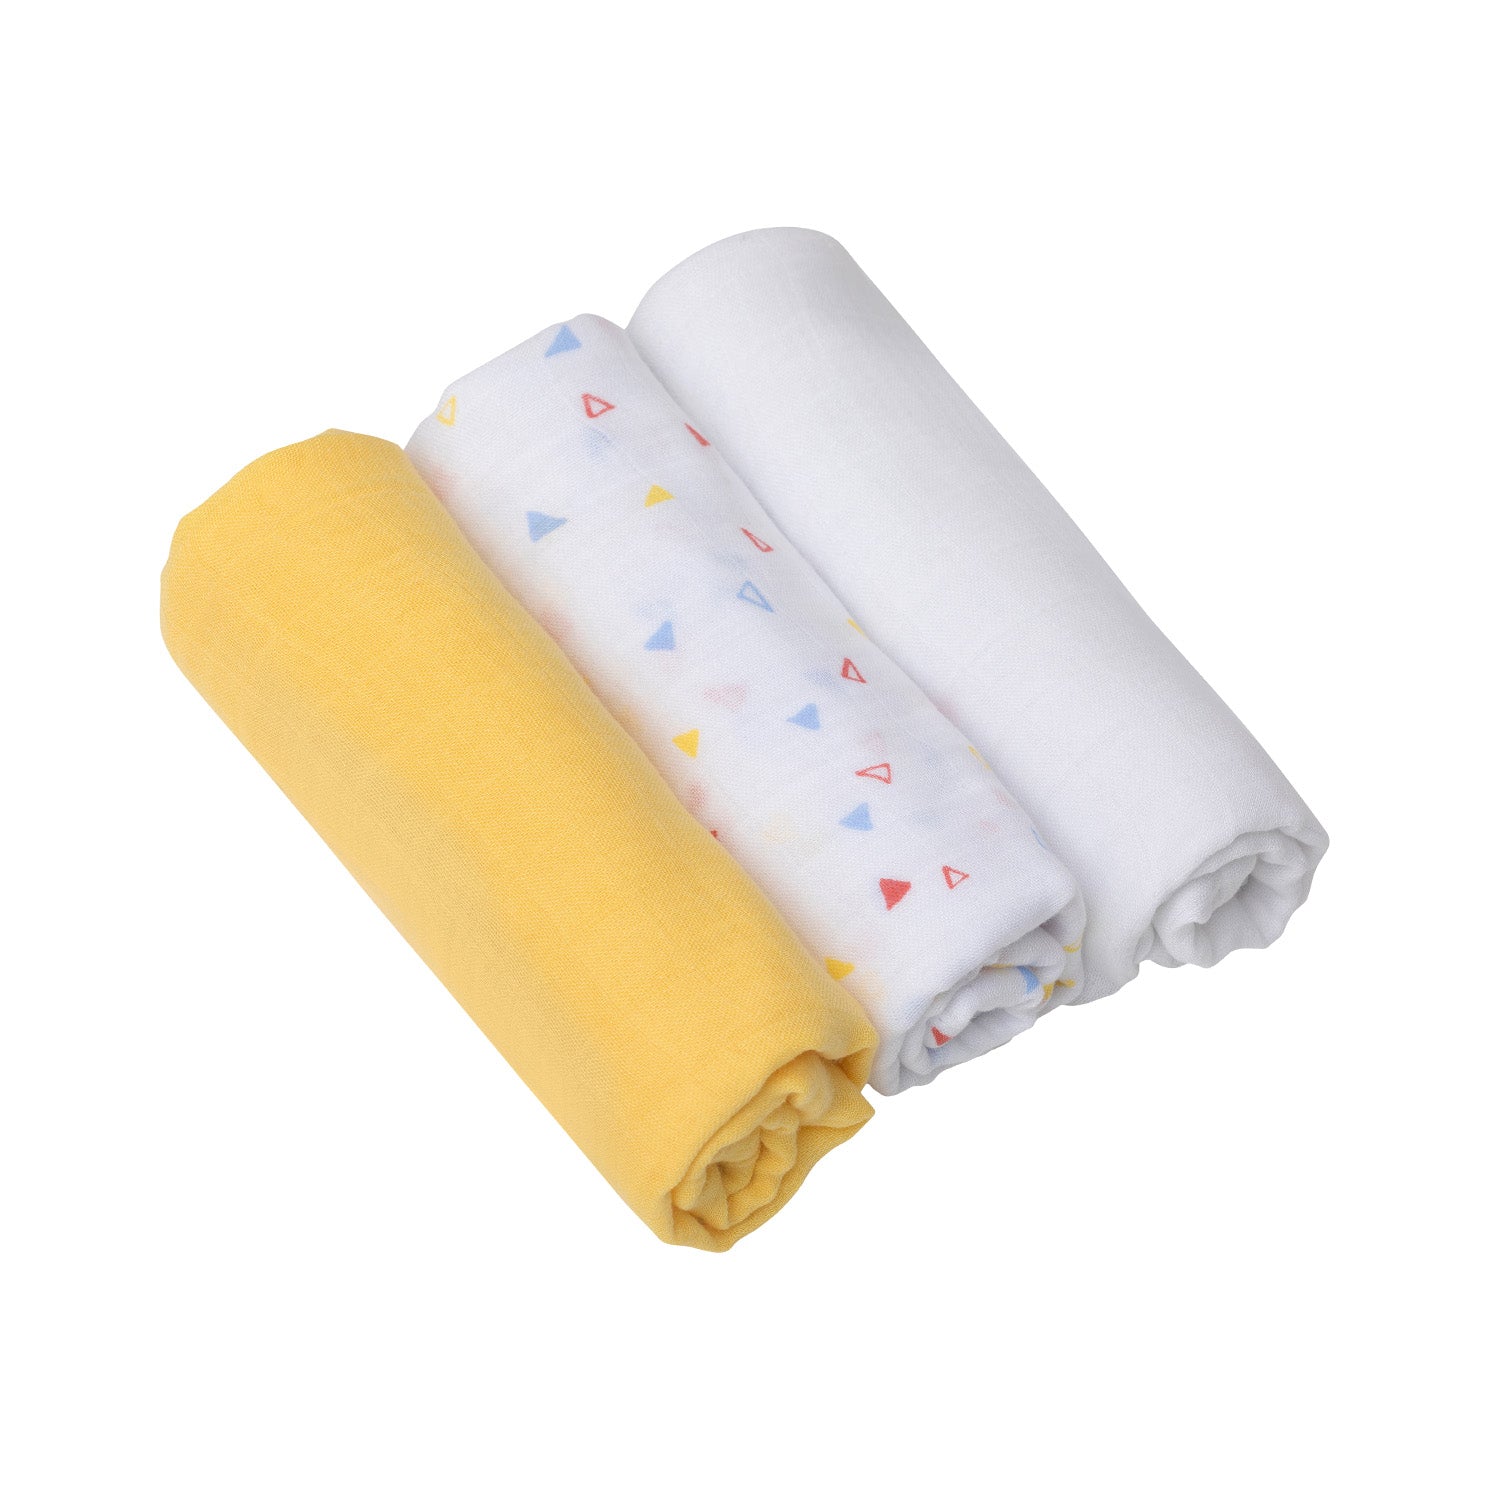 Muslin Cloth Set - Super Soft Bamboo & Cotton - Pack of 3 (Yellow)